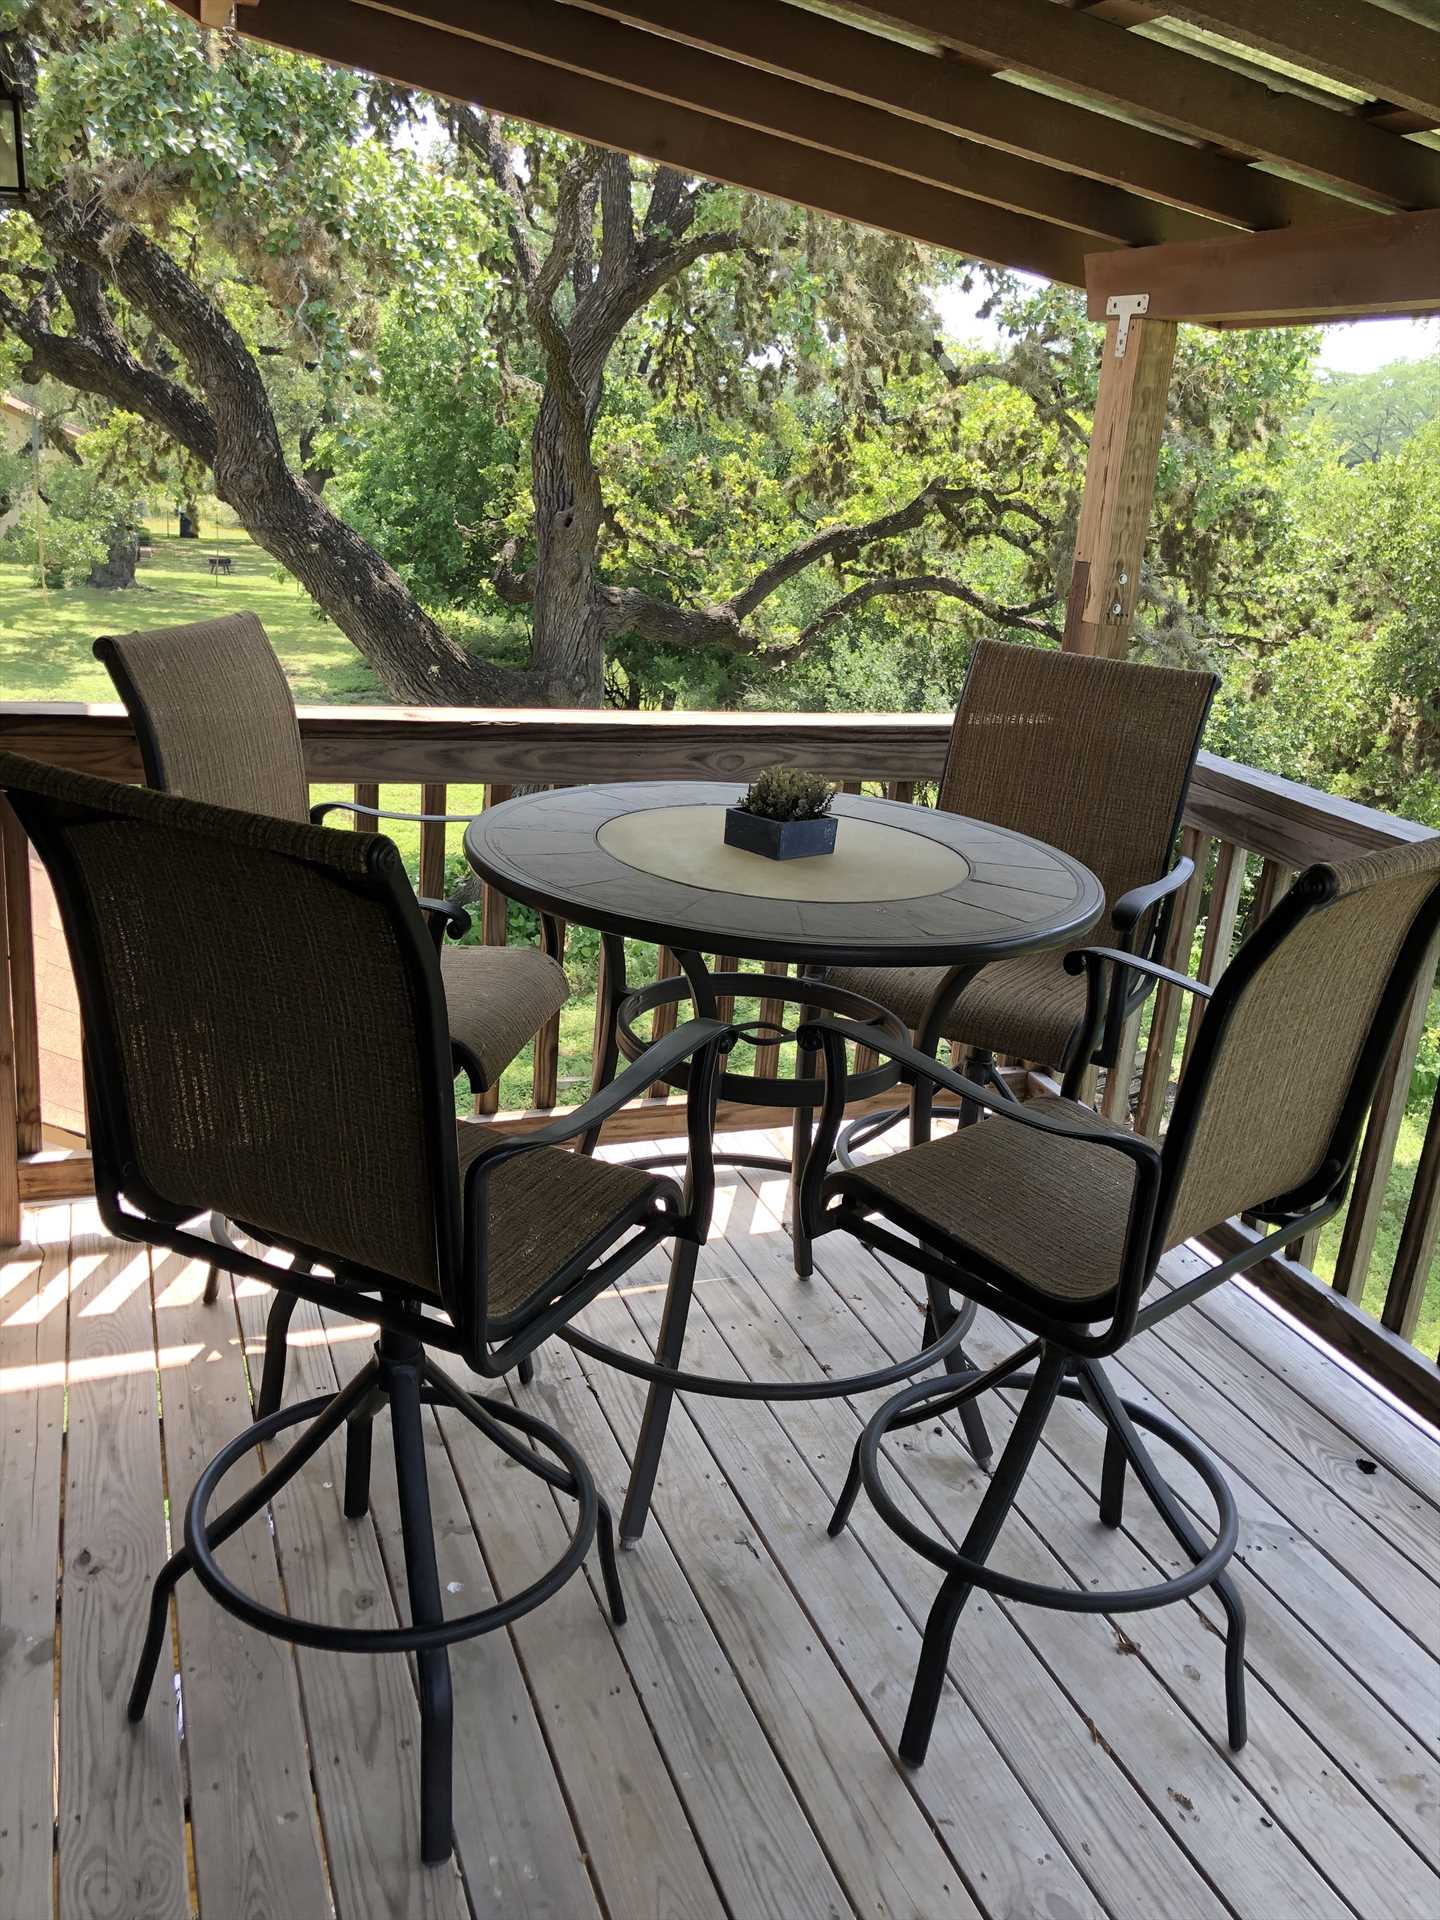                                                 Conversation and relaxation are yours whenever you'd like in the comfy patio furniture on the shaded deck.